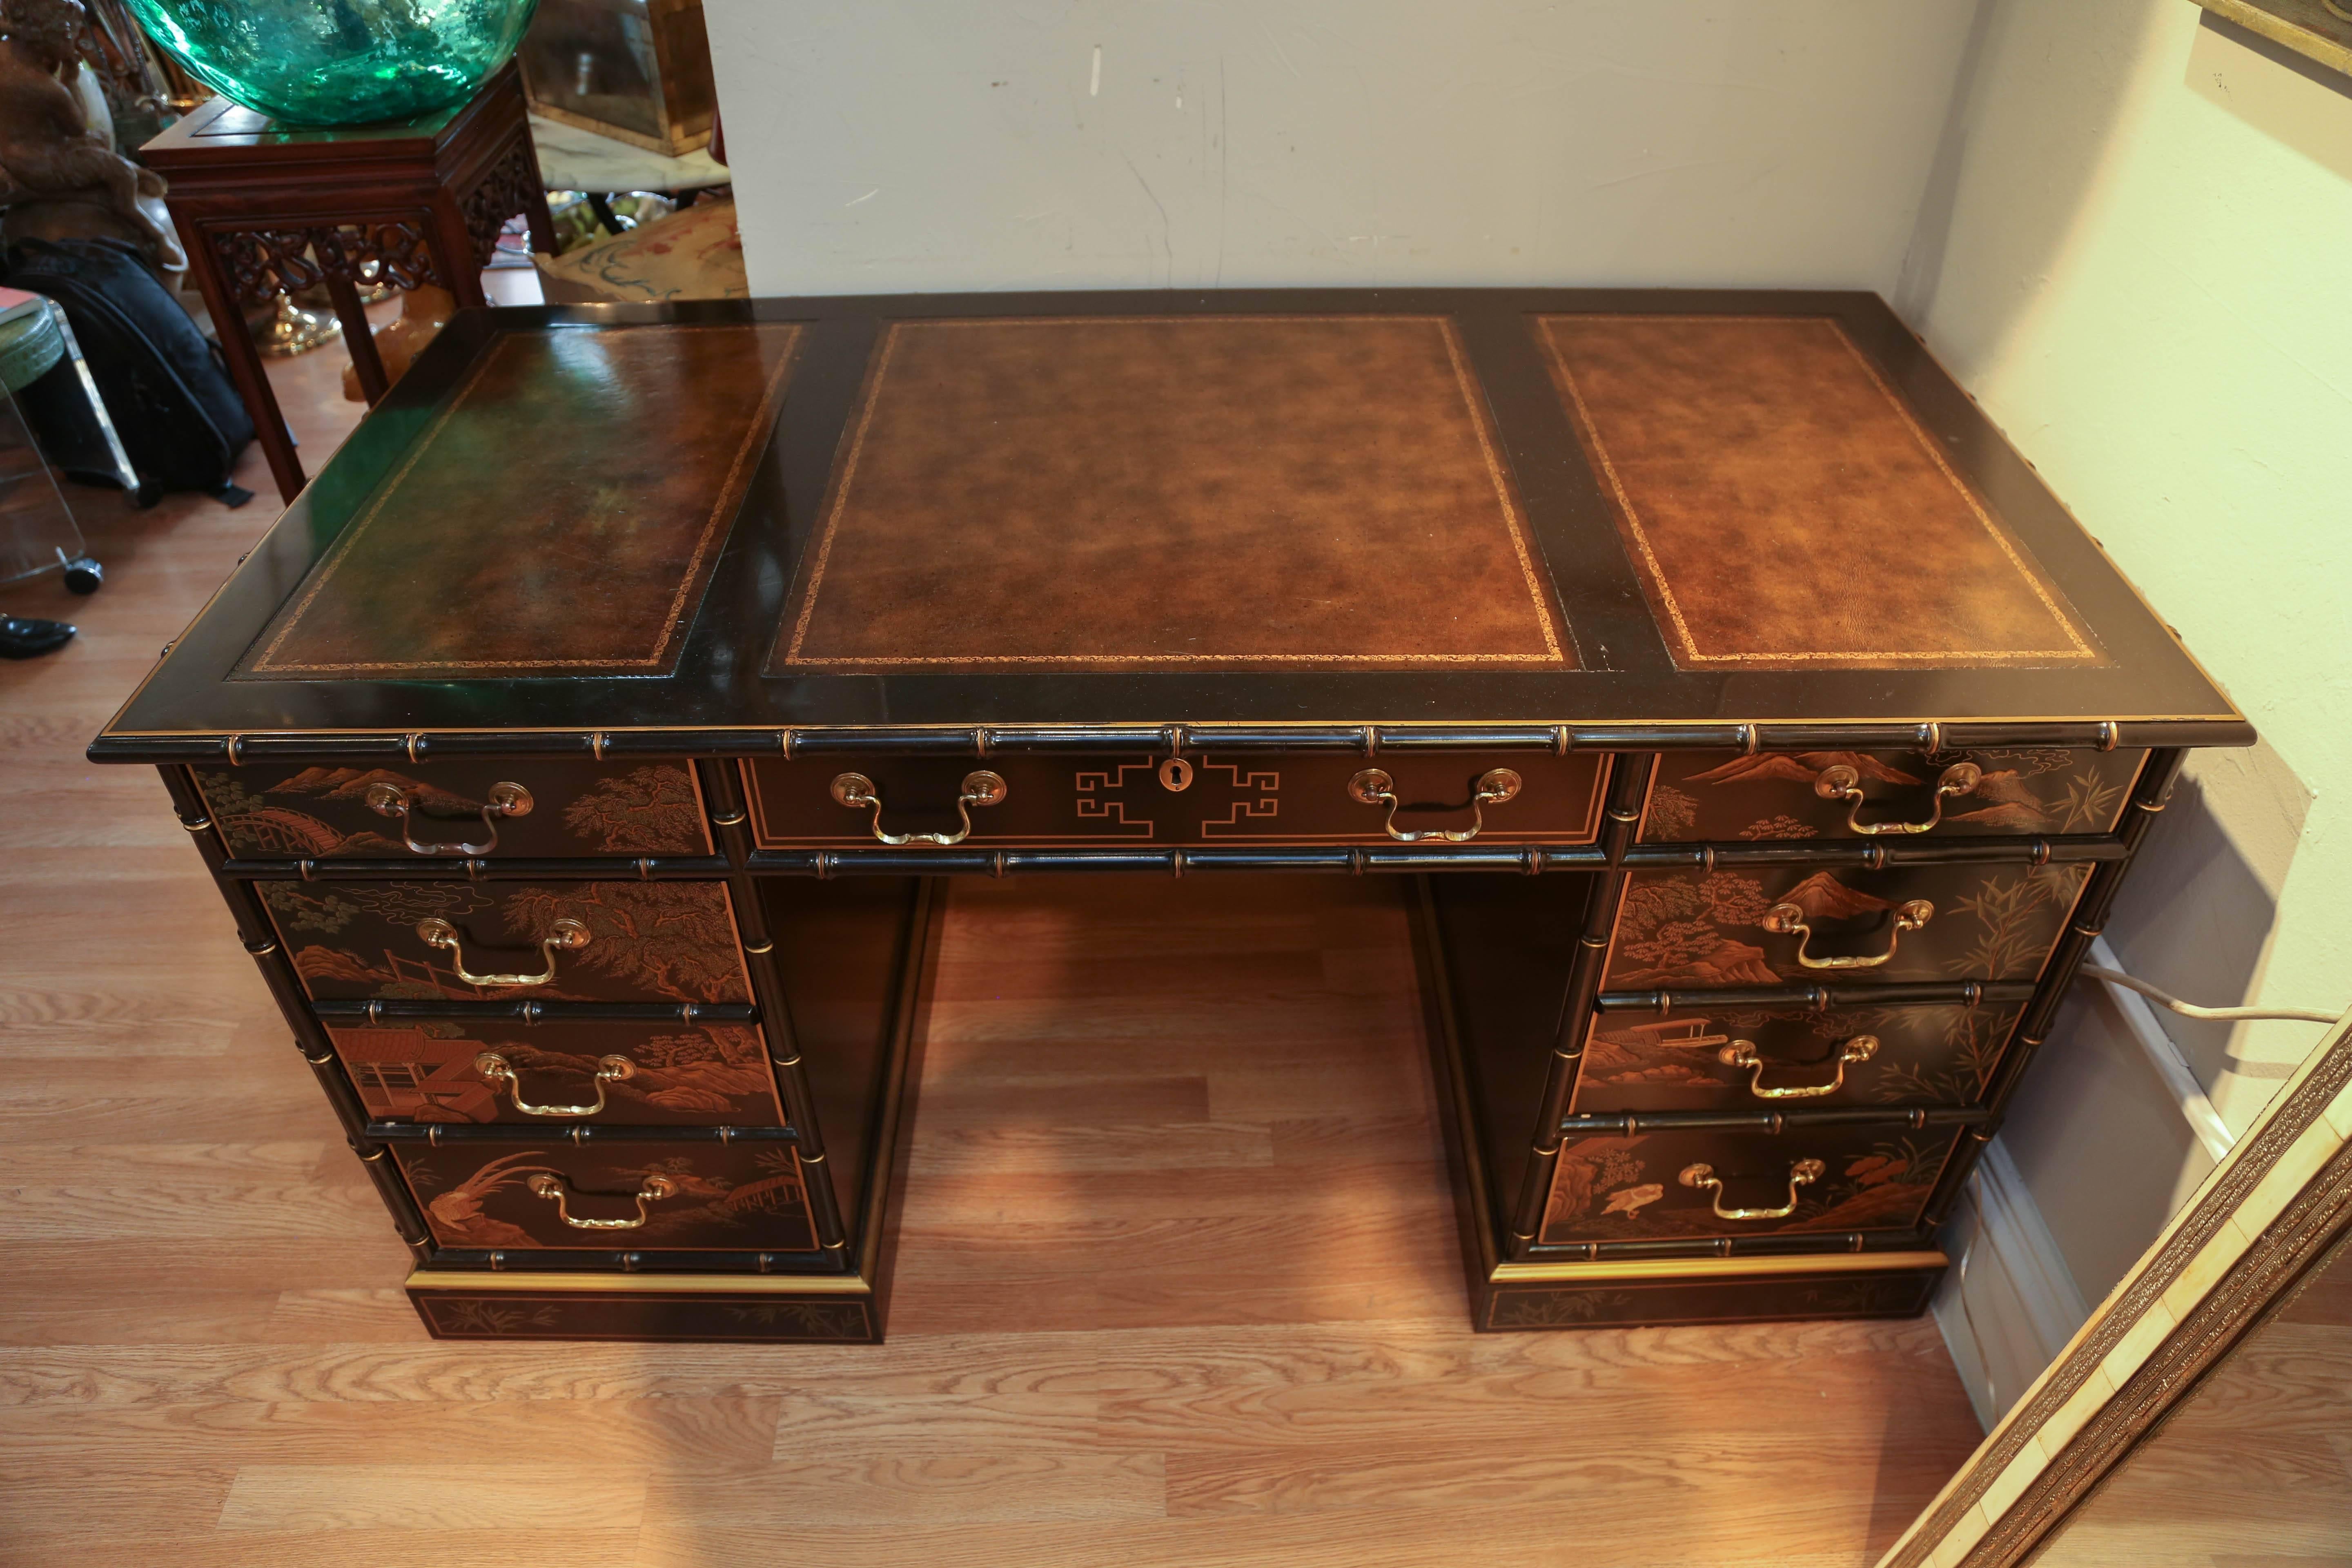 Black lacquered Chinoiserie partner's desk with brown leather embossed top. Drawers on front side only, but beautifully finished on all sides.